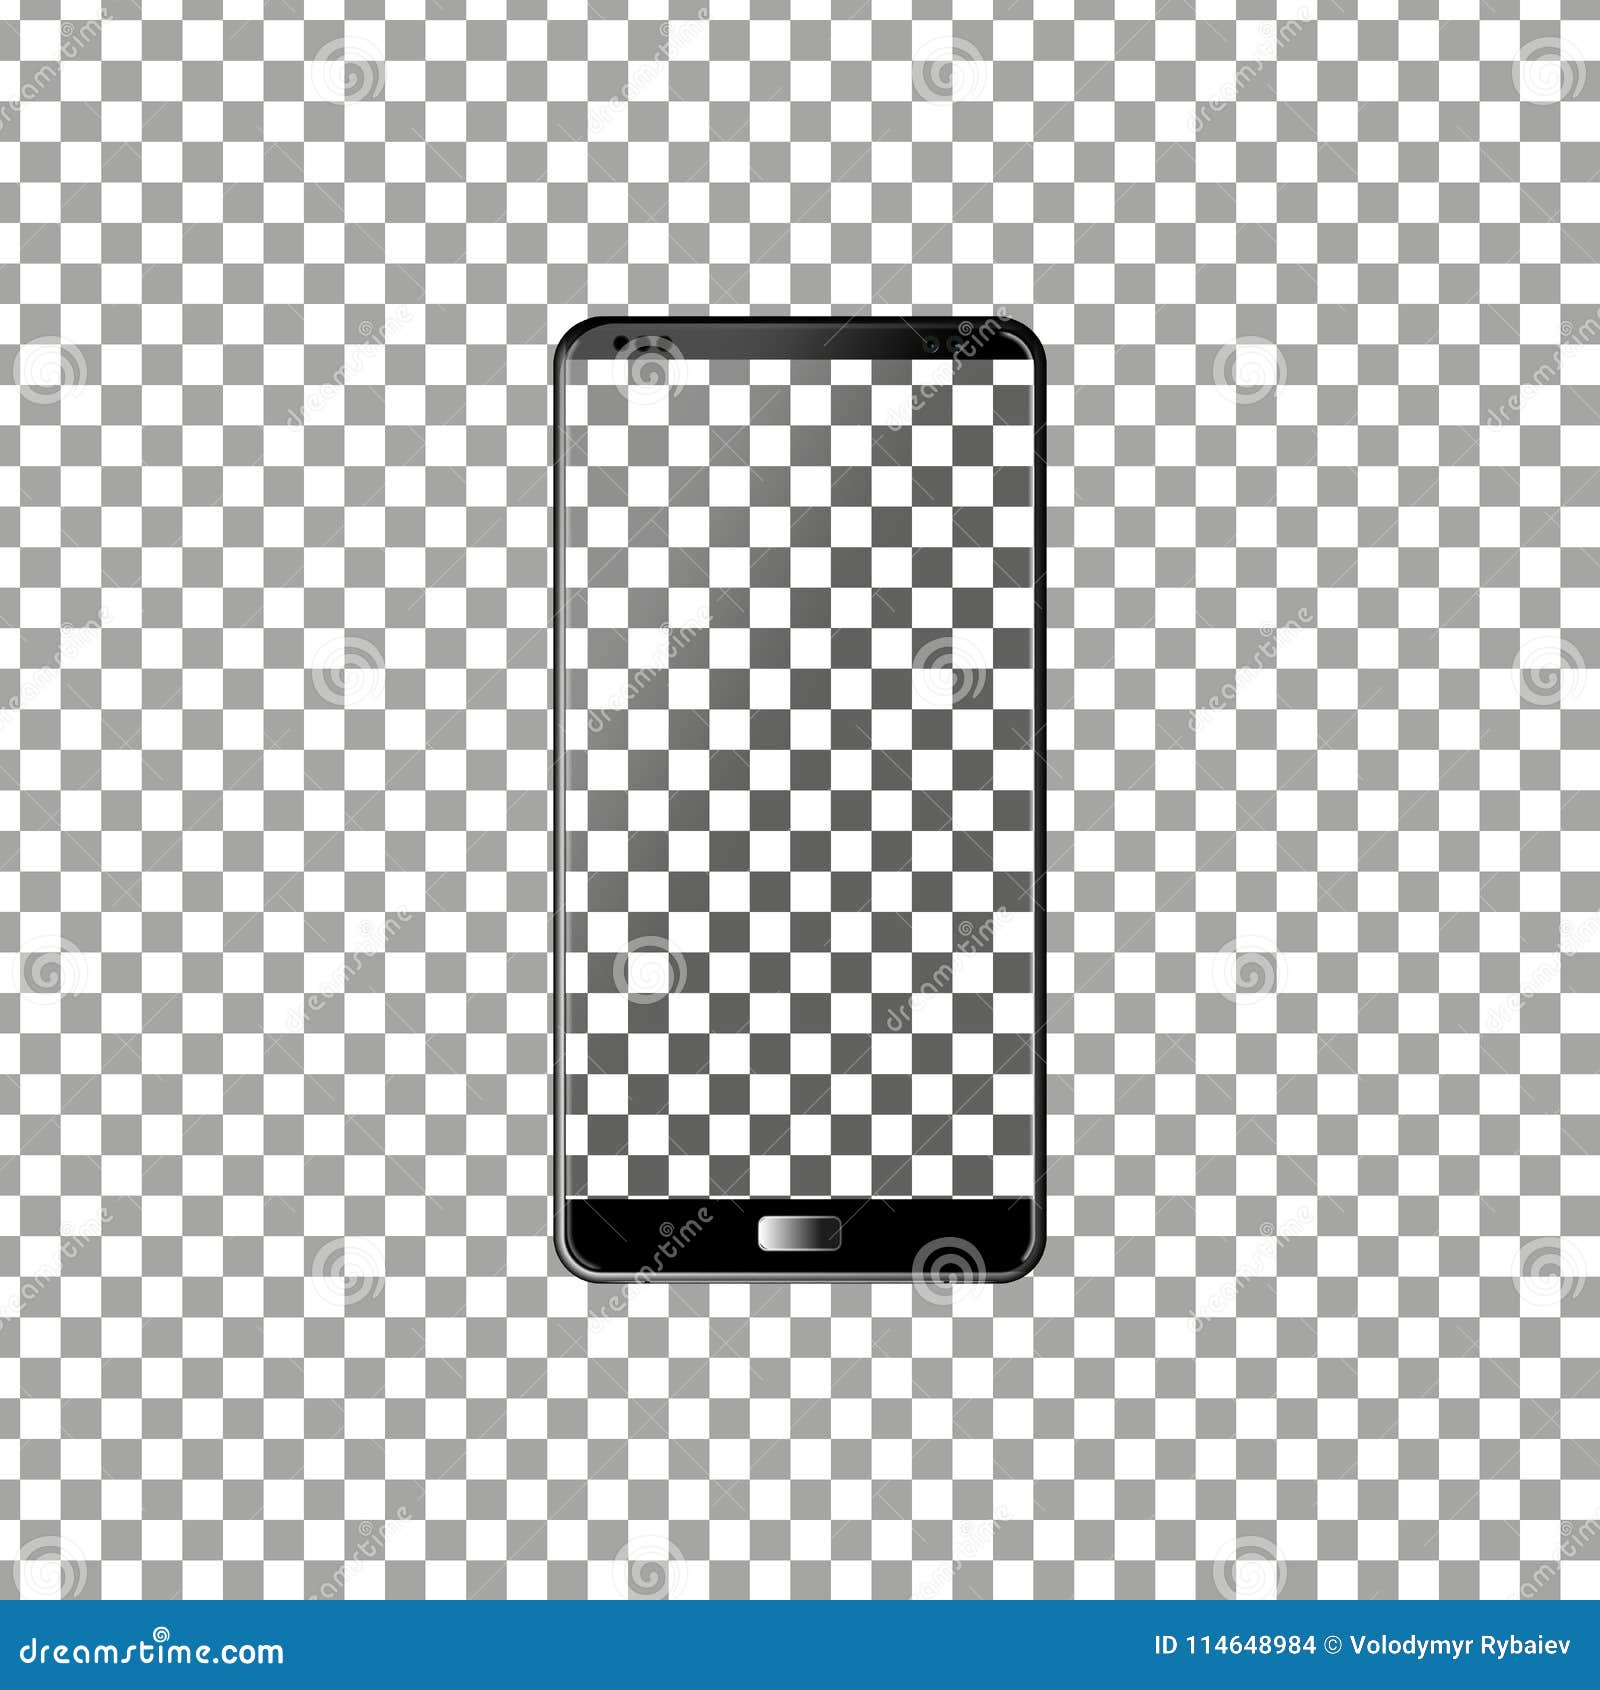 New Phone Front and Black Vector Drawing Eps10 Format Isolated on Transparent  Background Stock Illustration - Illustration of digital, icon: 114648984